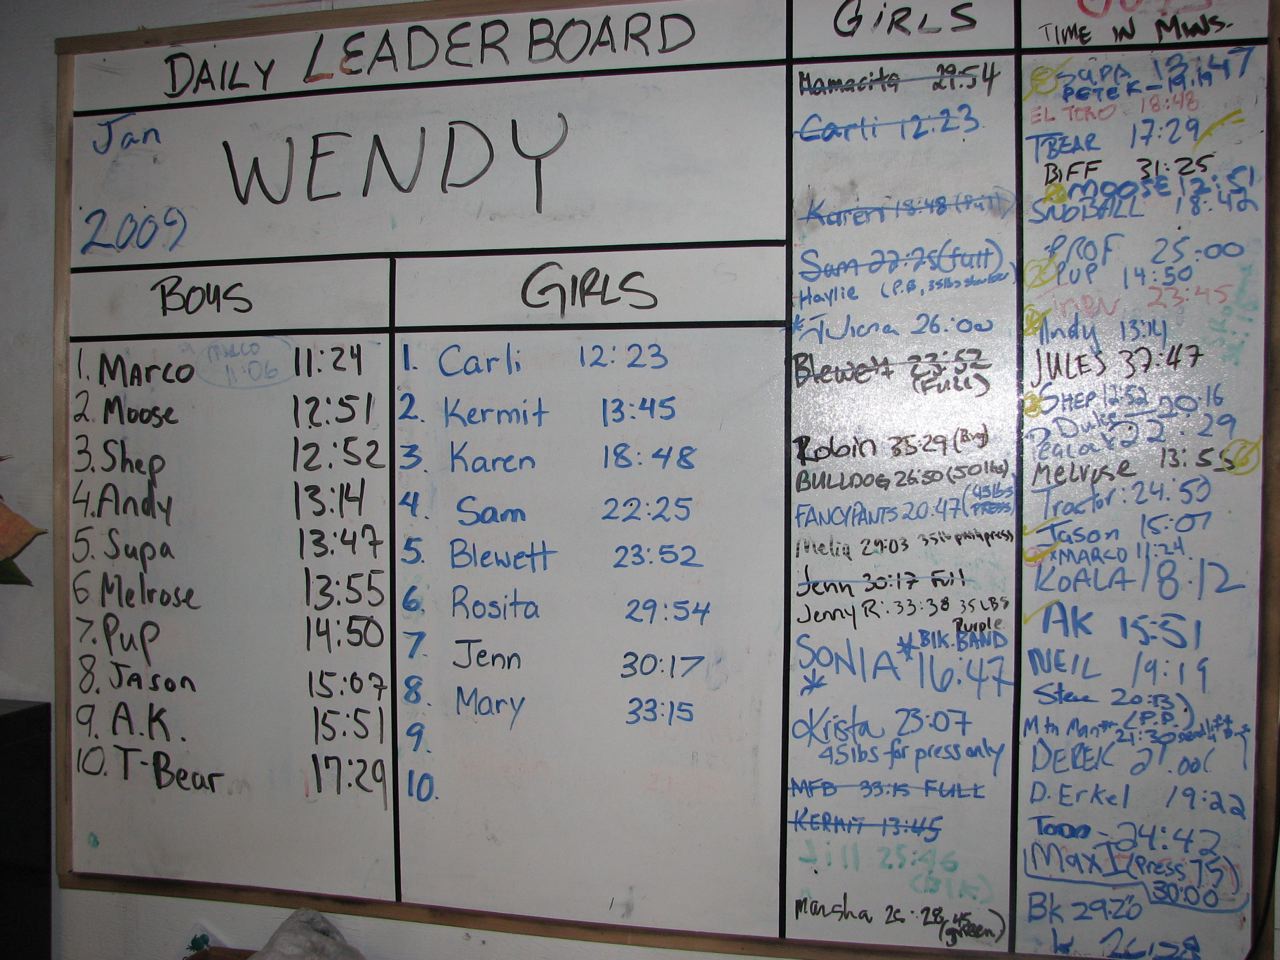 WOD:  Wendy (and I don't mean the redhead from the burger joint)